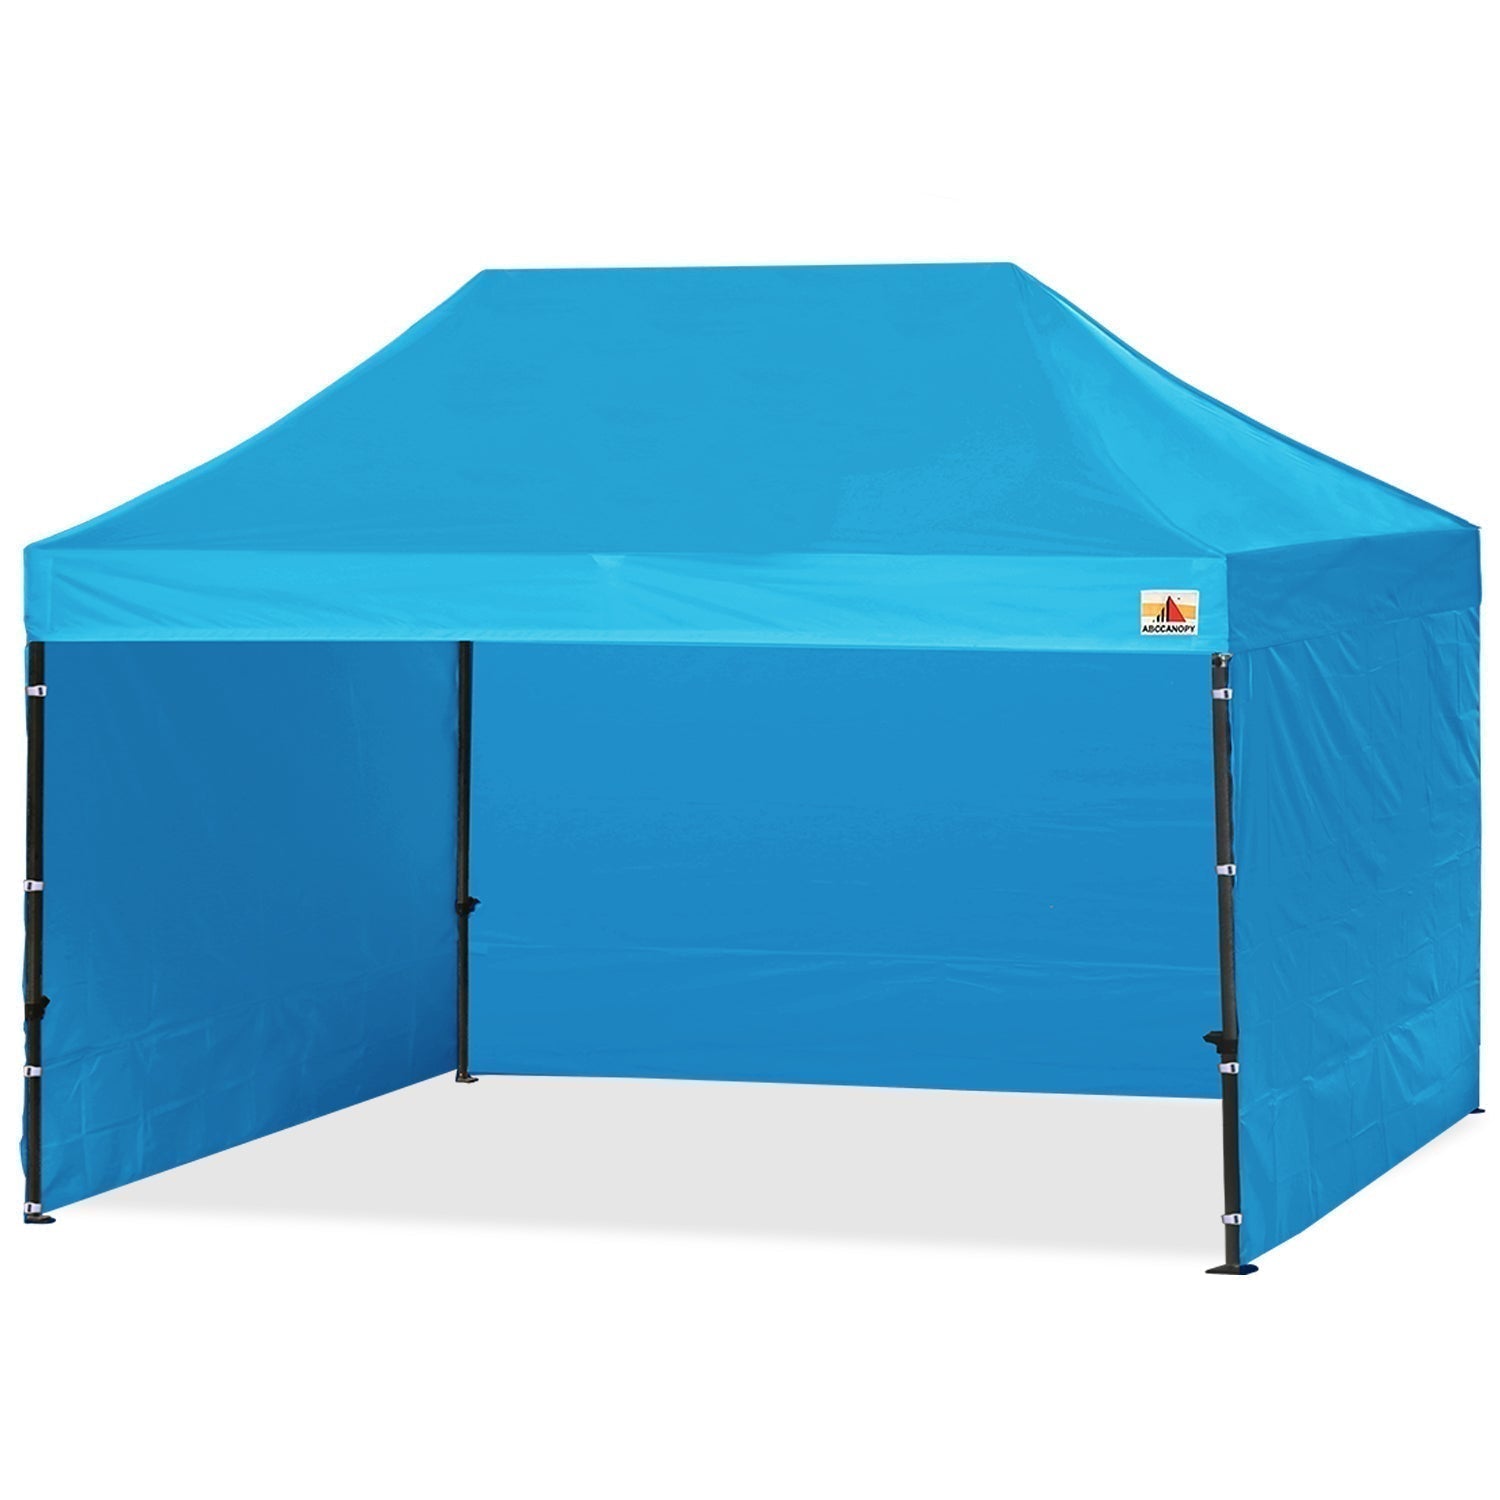 S1 Commercial Pop Up Canopy Tent with Sidewalls 10x15 Instant Shelter